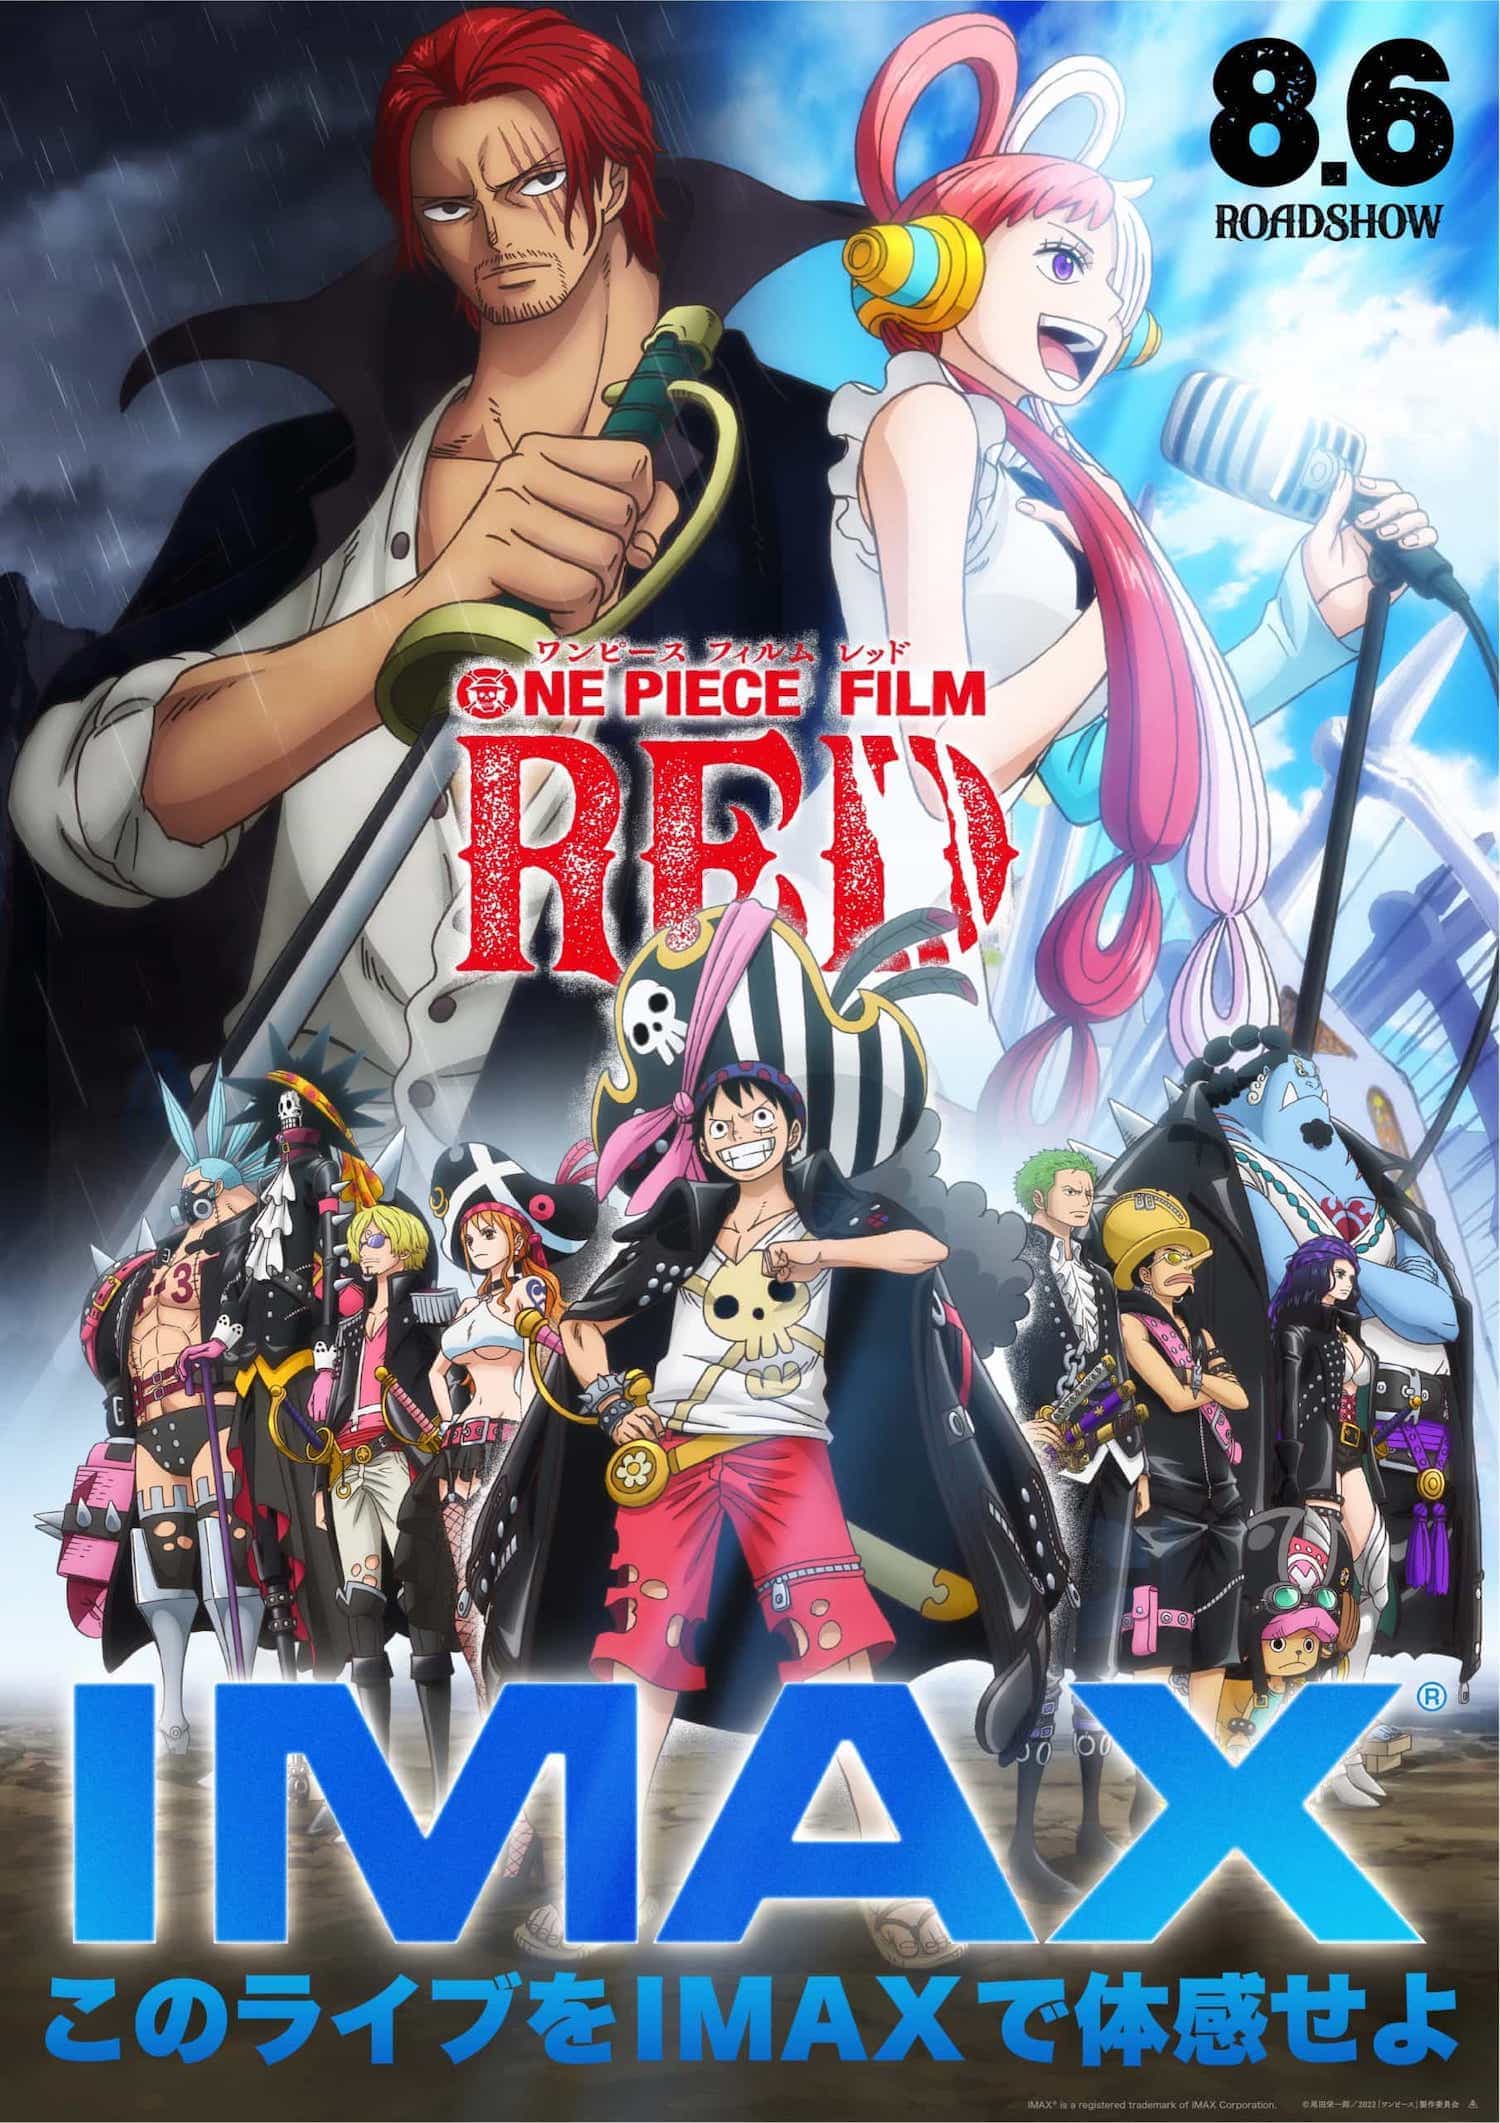 One Piece Film: Red is given a 12A age rating in the UK for moderate violence, bloody images